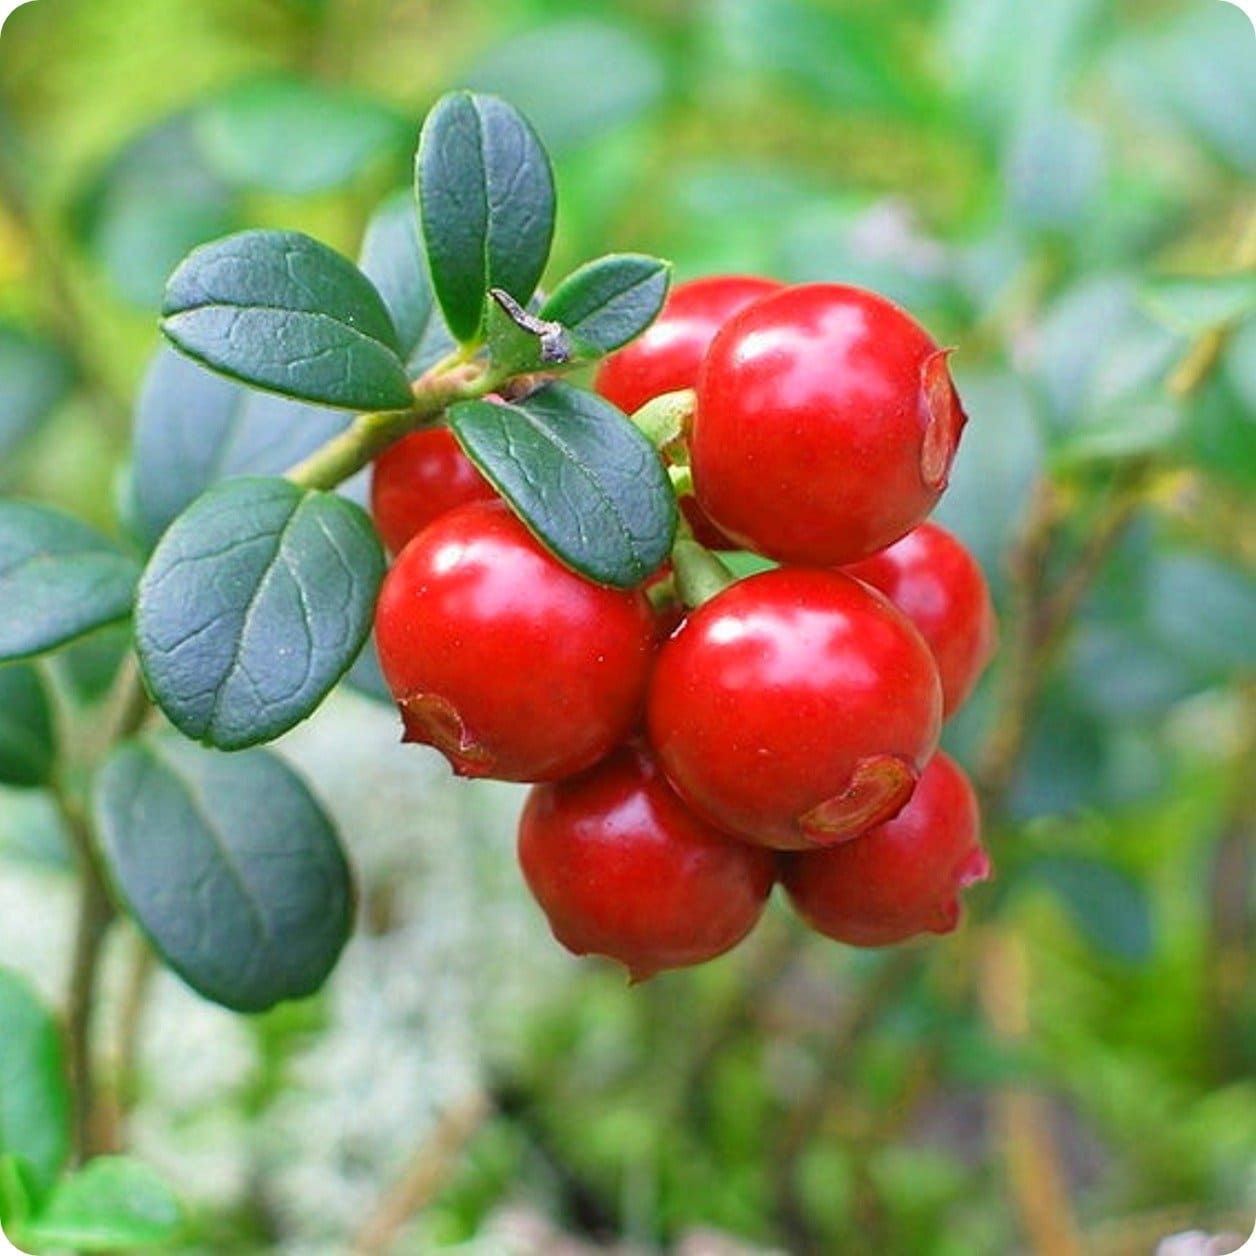 cranberry-plant-New-latest Materia Medica-Best Homeopathic doctor-Pakistan-Dr Qaisar Ahmed MD, DHMS